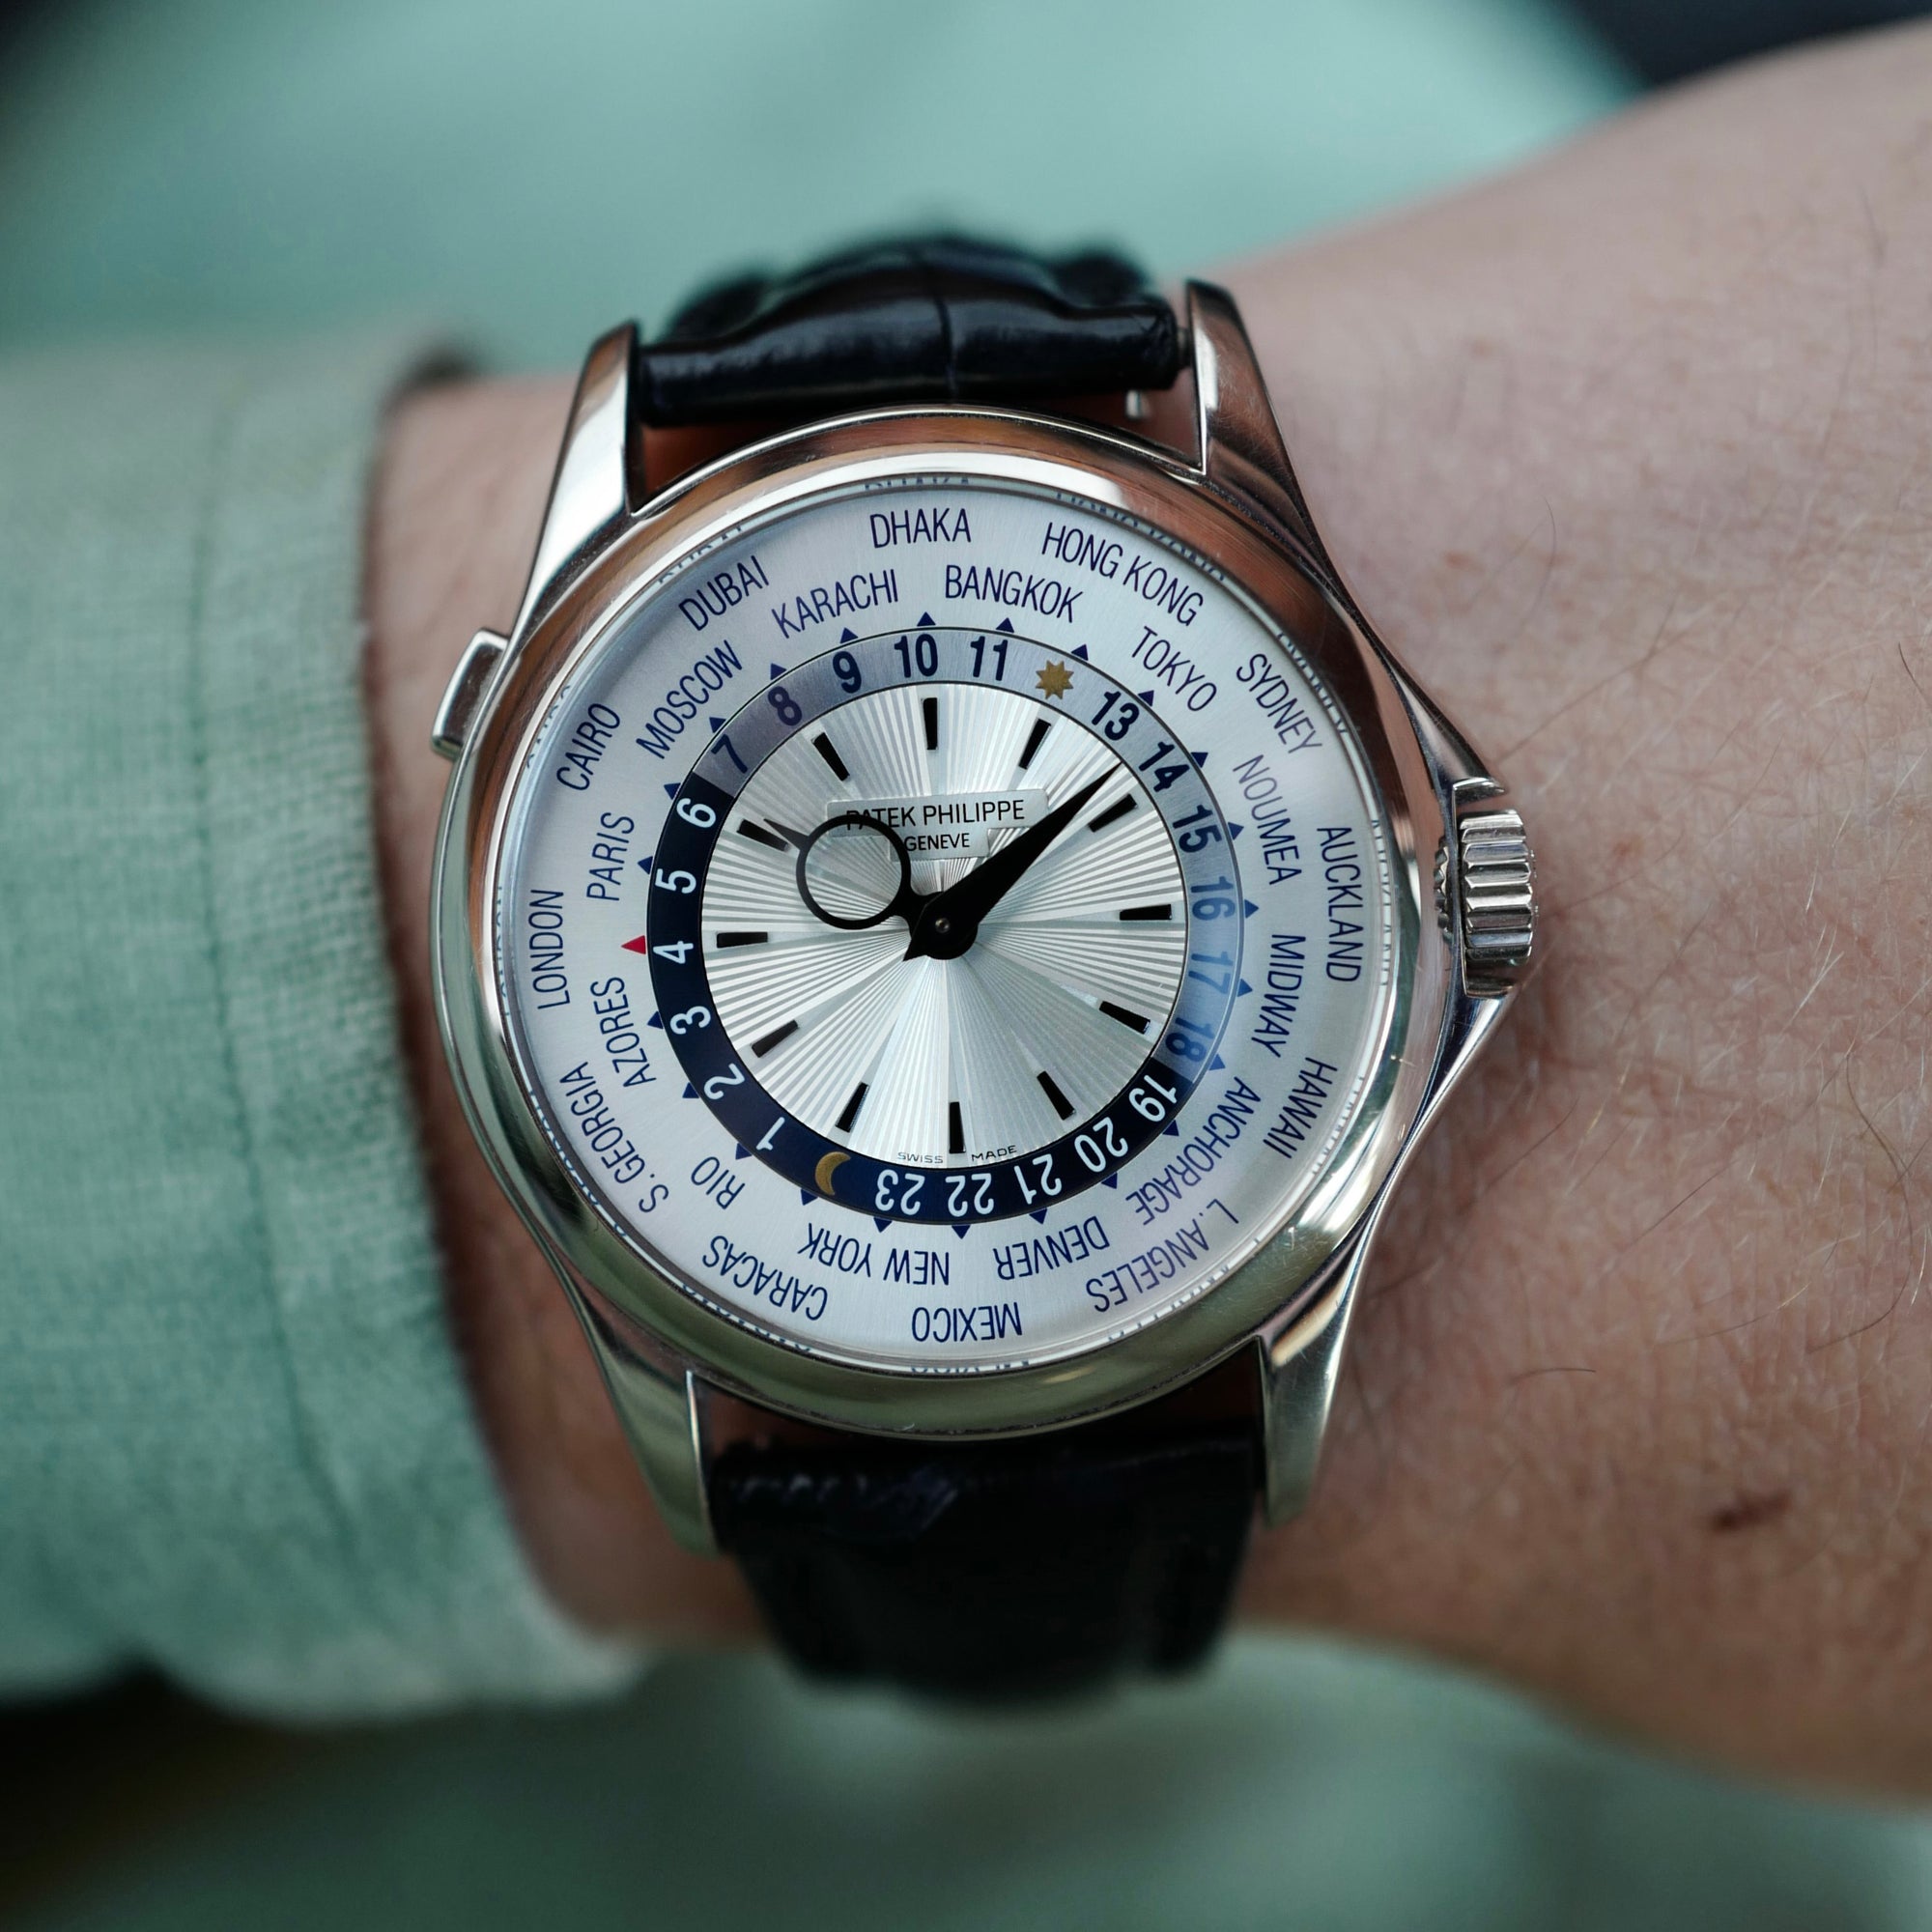 Patek Philippe - Patek Philippe White Gold World Time Watch Ref. 5130 (NEW ARRIVAL) - The Keystone Watches